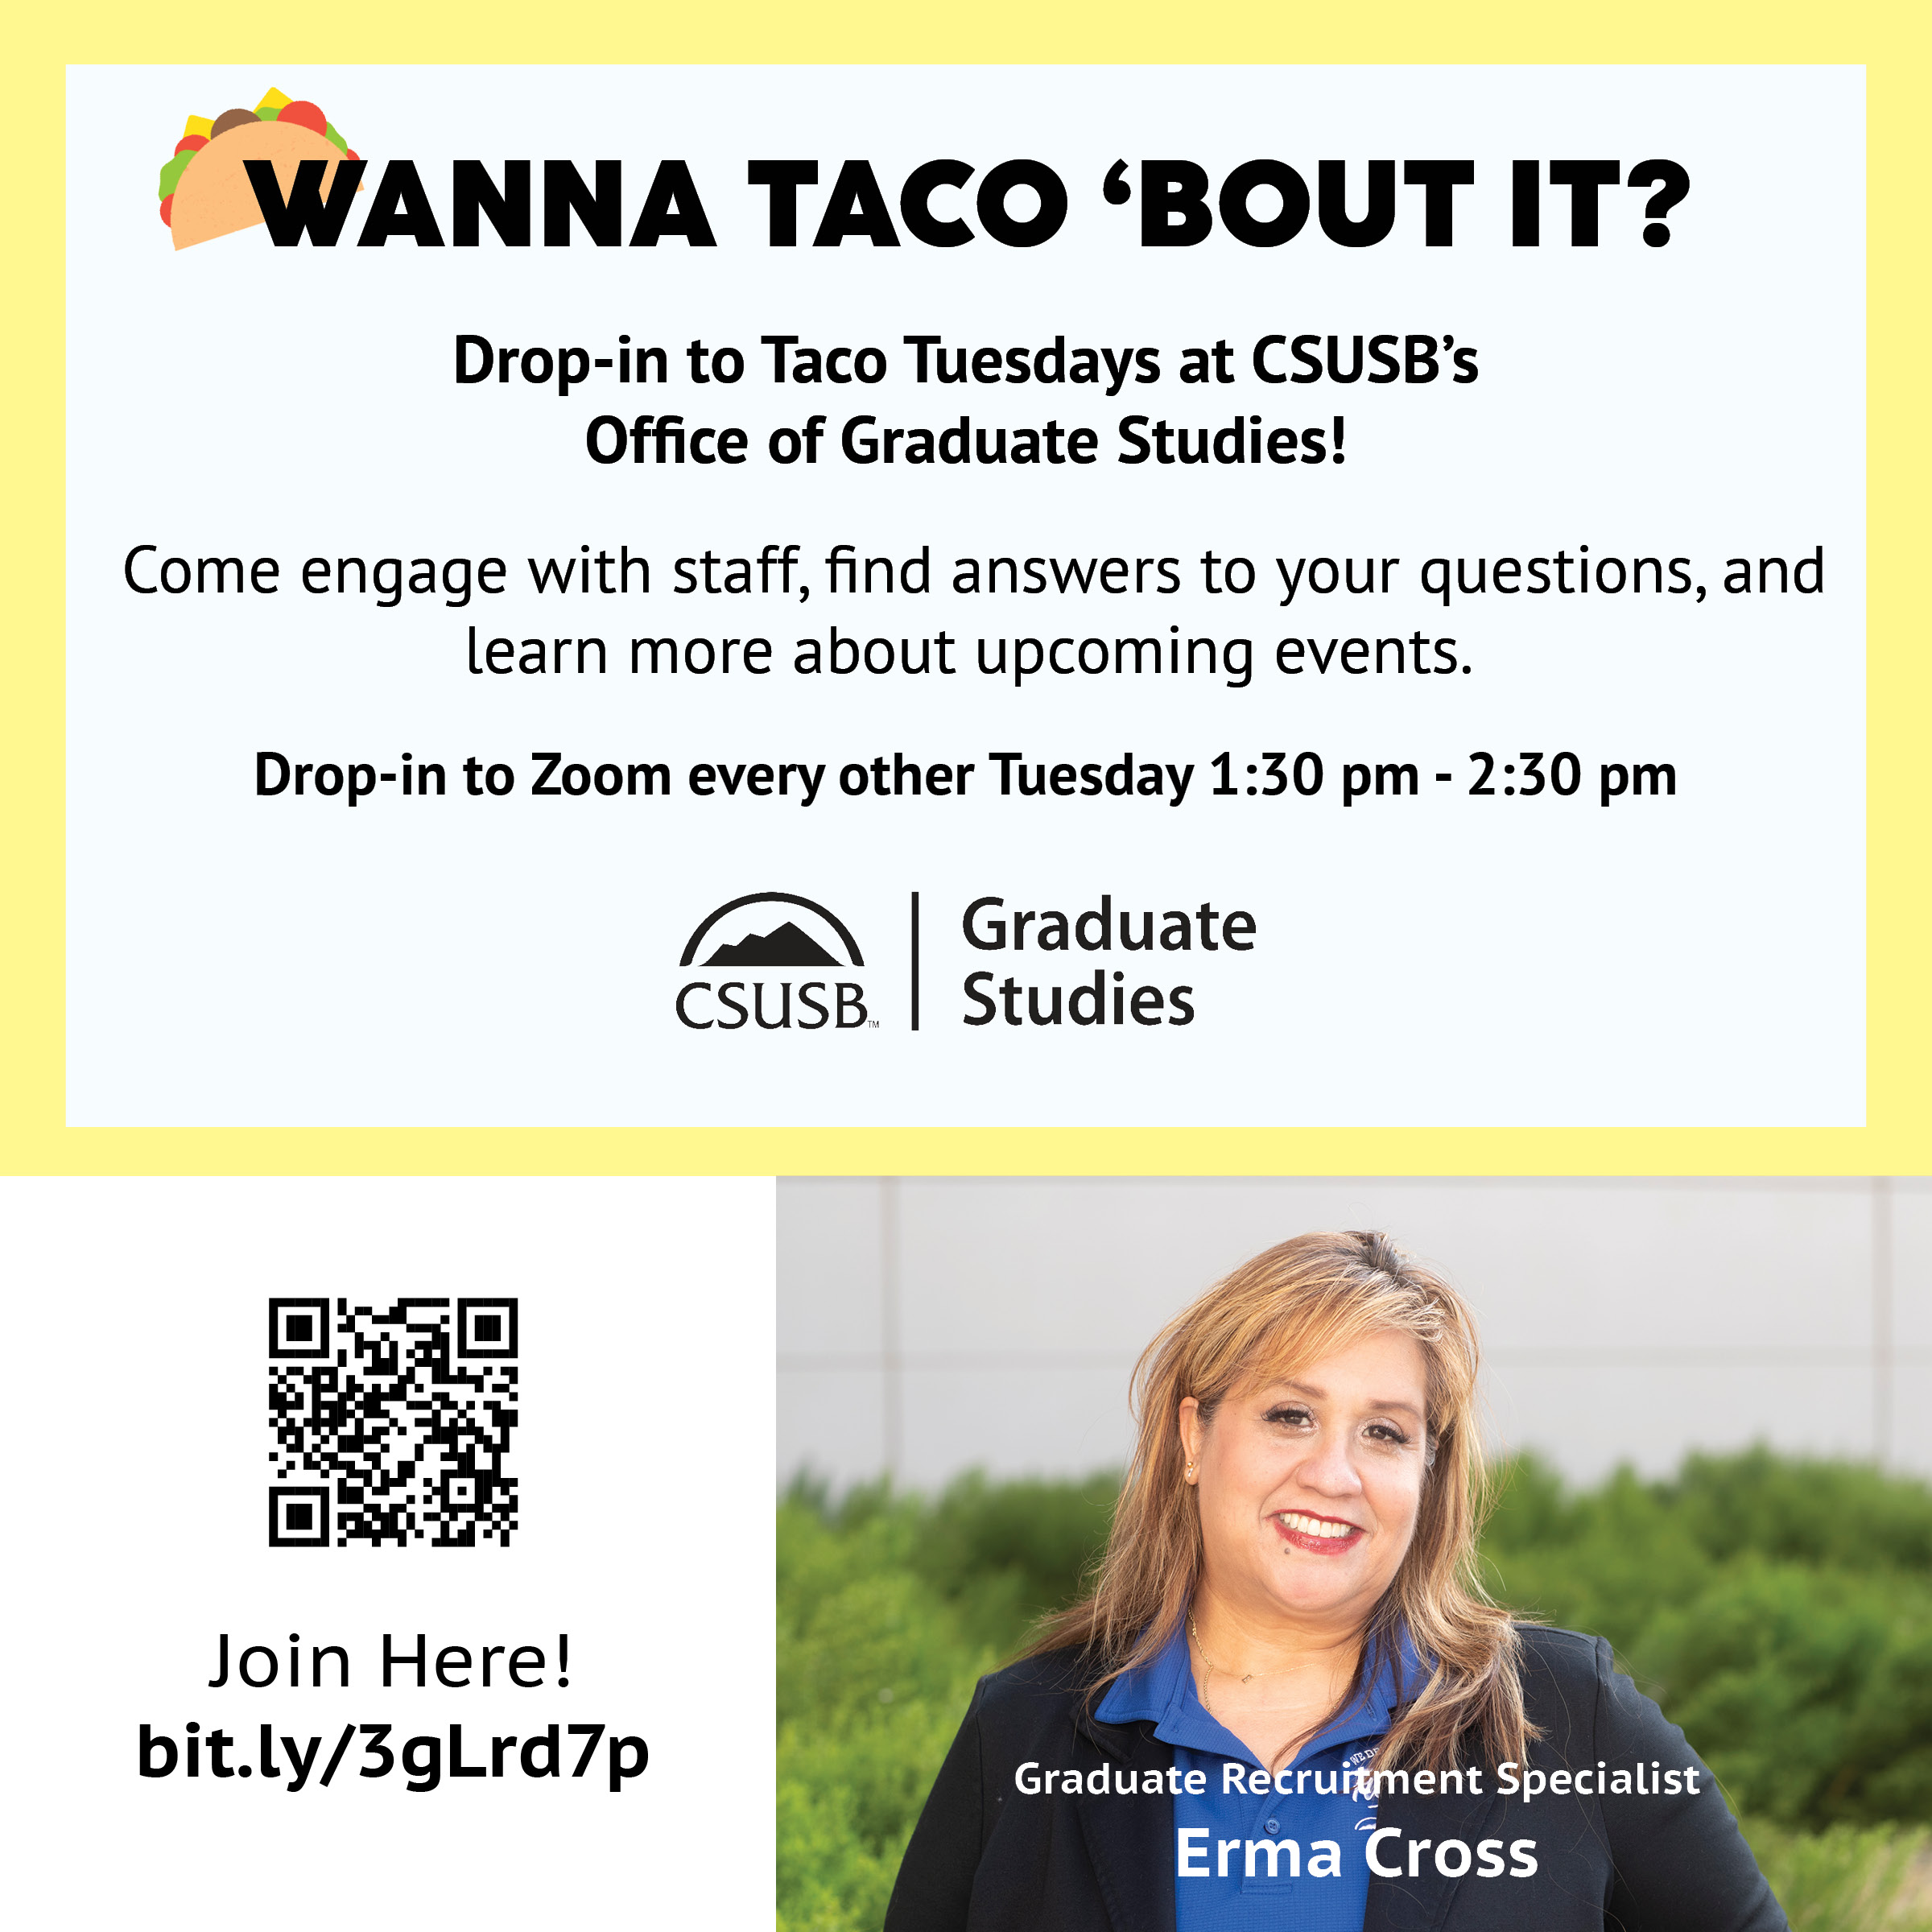 Taco Tuesday Drop In Session! No RSVP required.